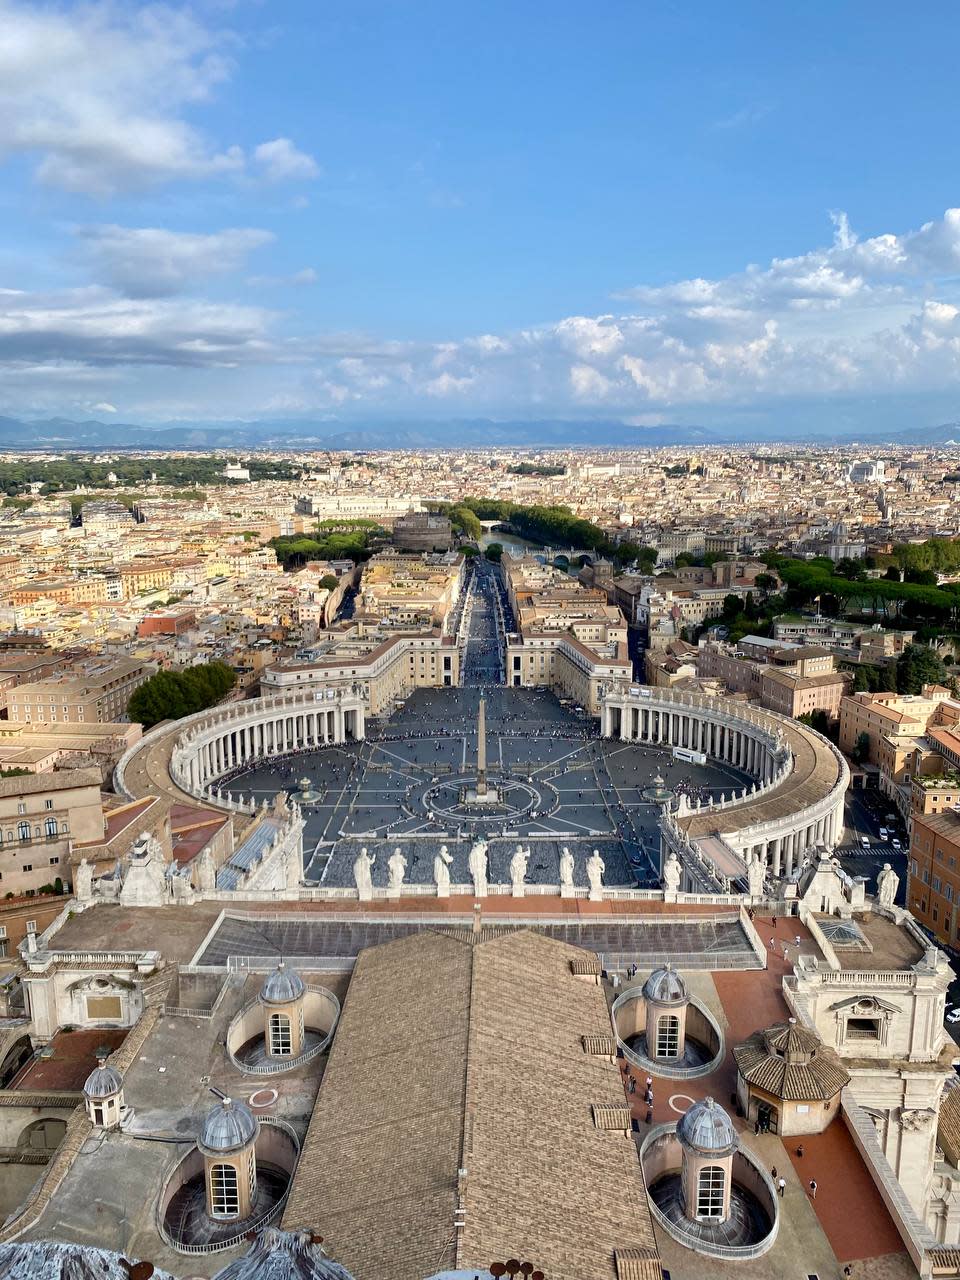 The view from St. Peter's Basilica, Vatican